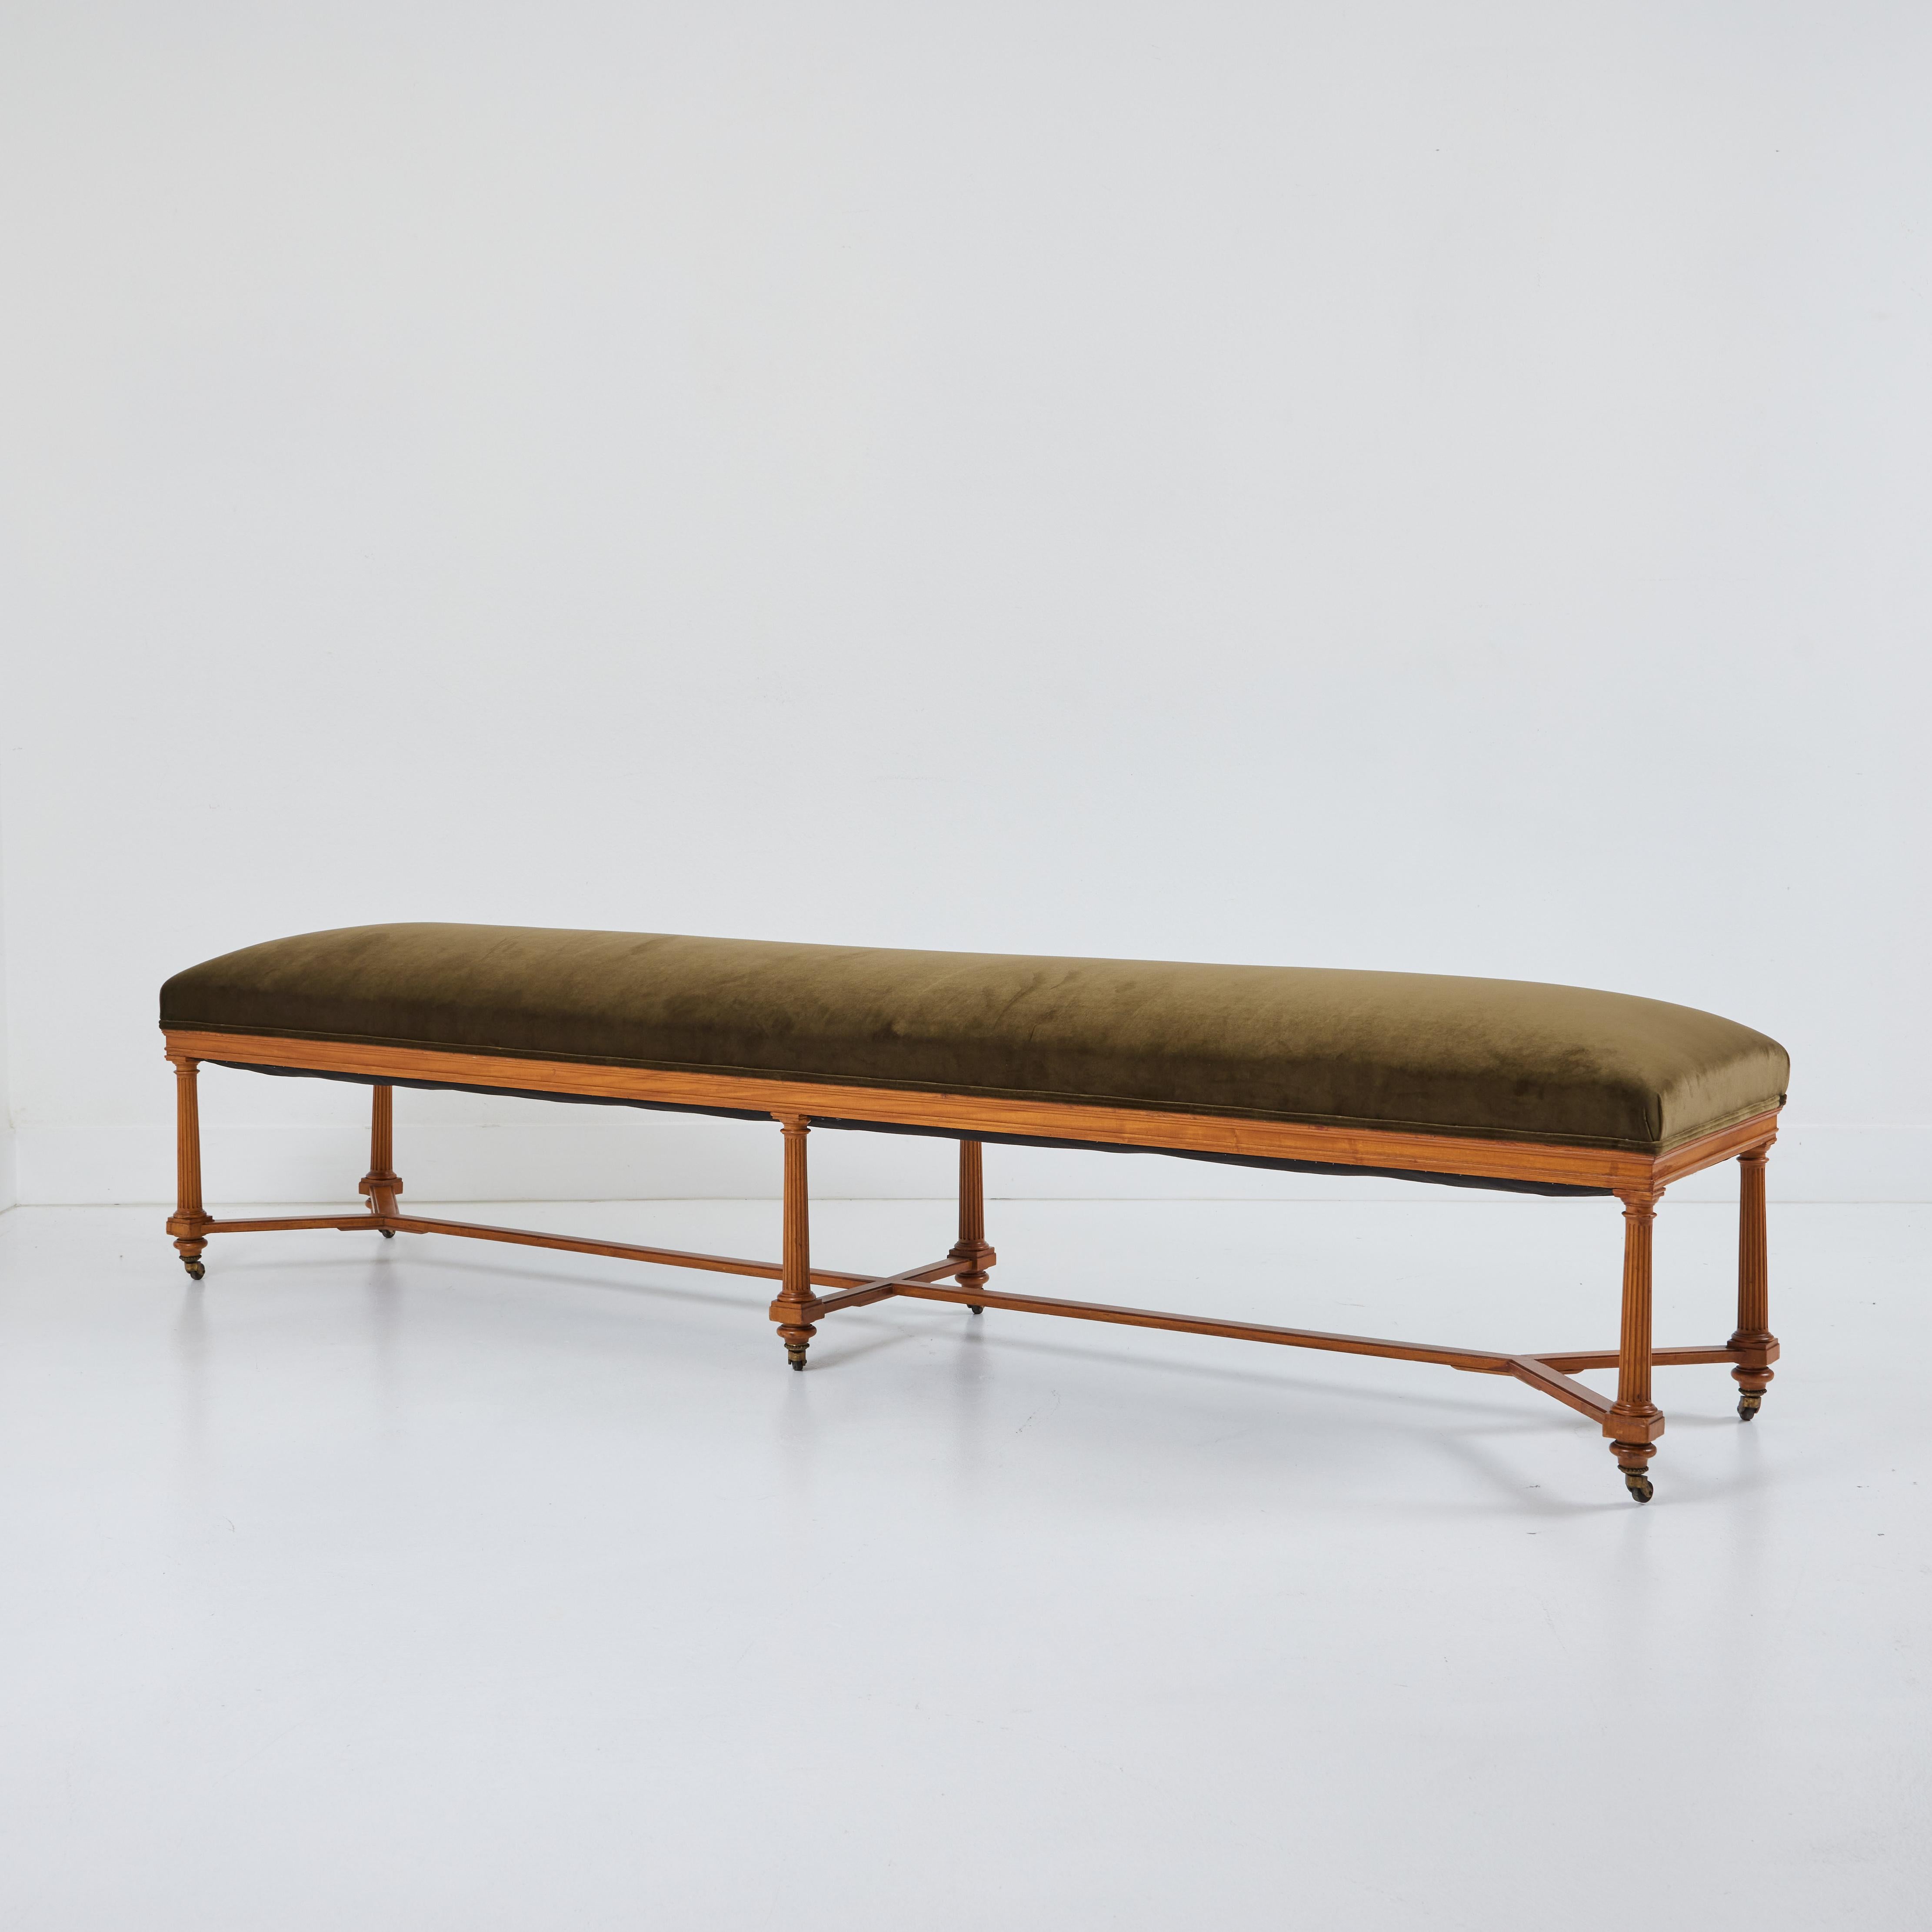 This grand and stately pair of benches measure a generous eight feet long and are nearly two feet wide.  They have been newly upholstered in a dark olive/green Jab velvet and are finished with a double welt. The beautifully mellowed original finish